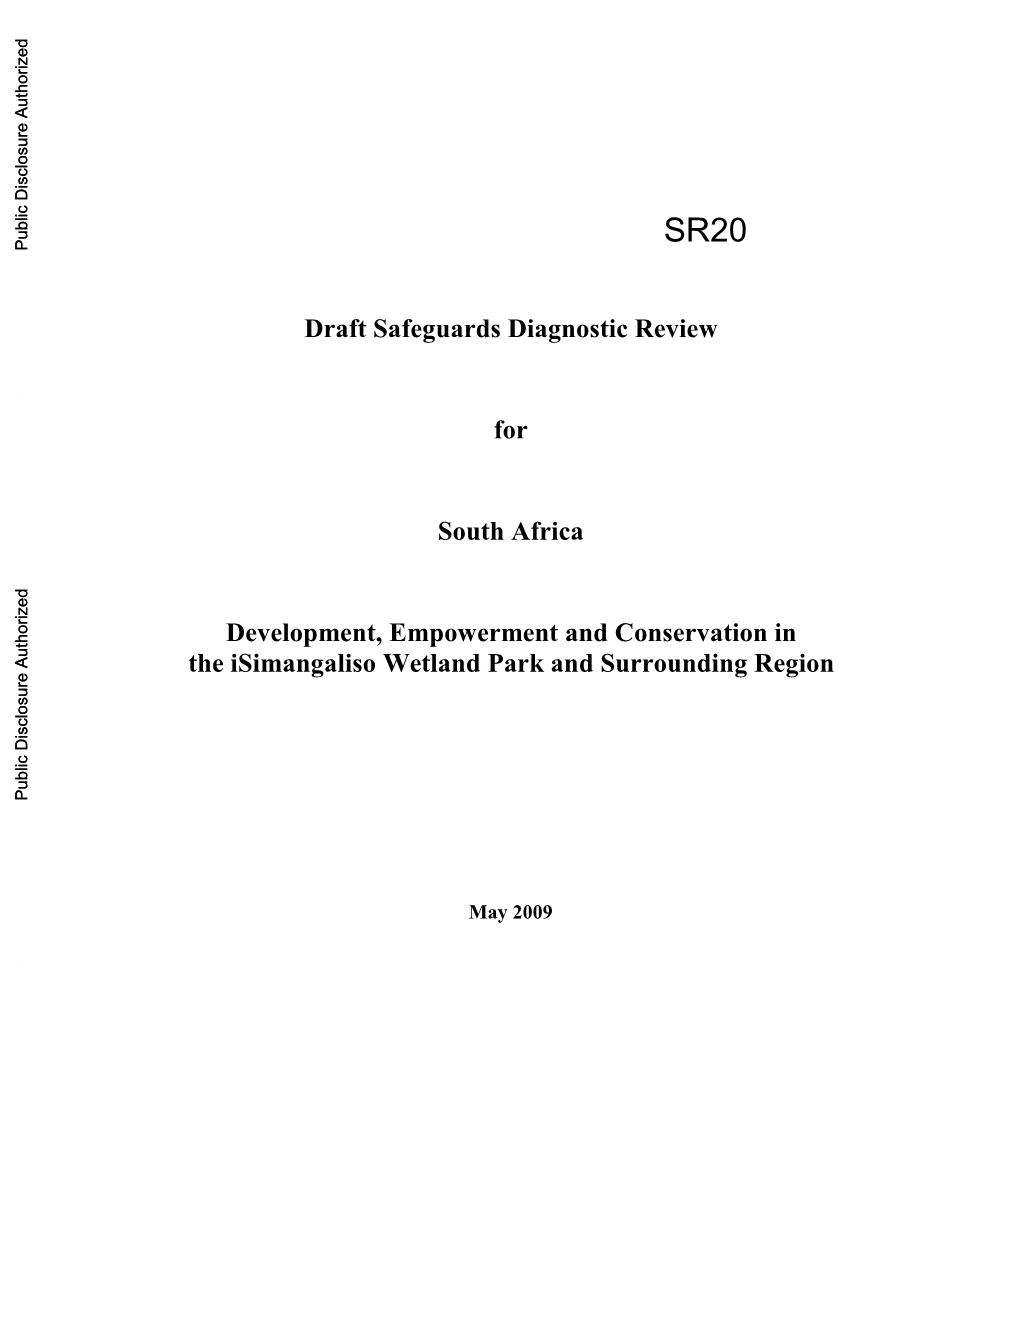 Draft Safeguards Diagnostic Review for South